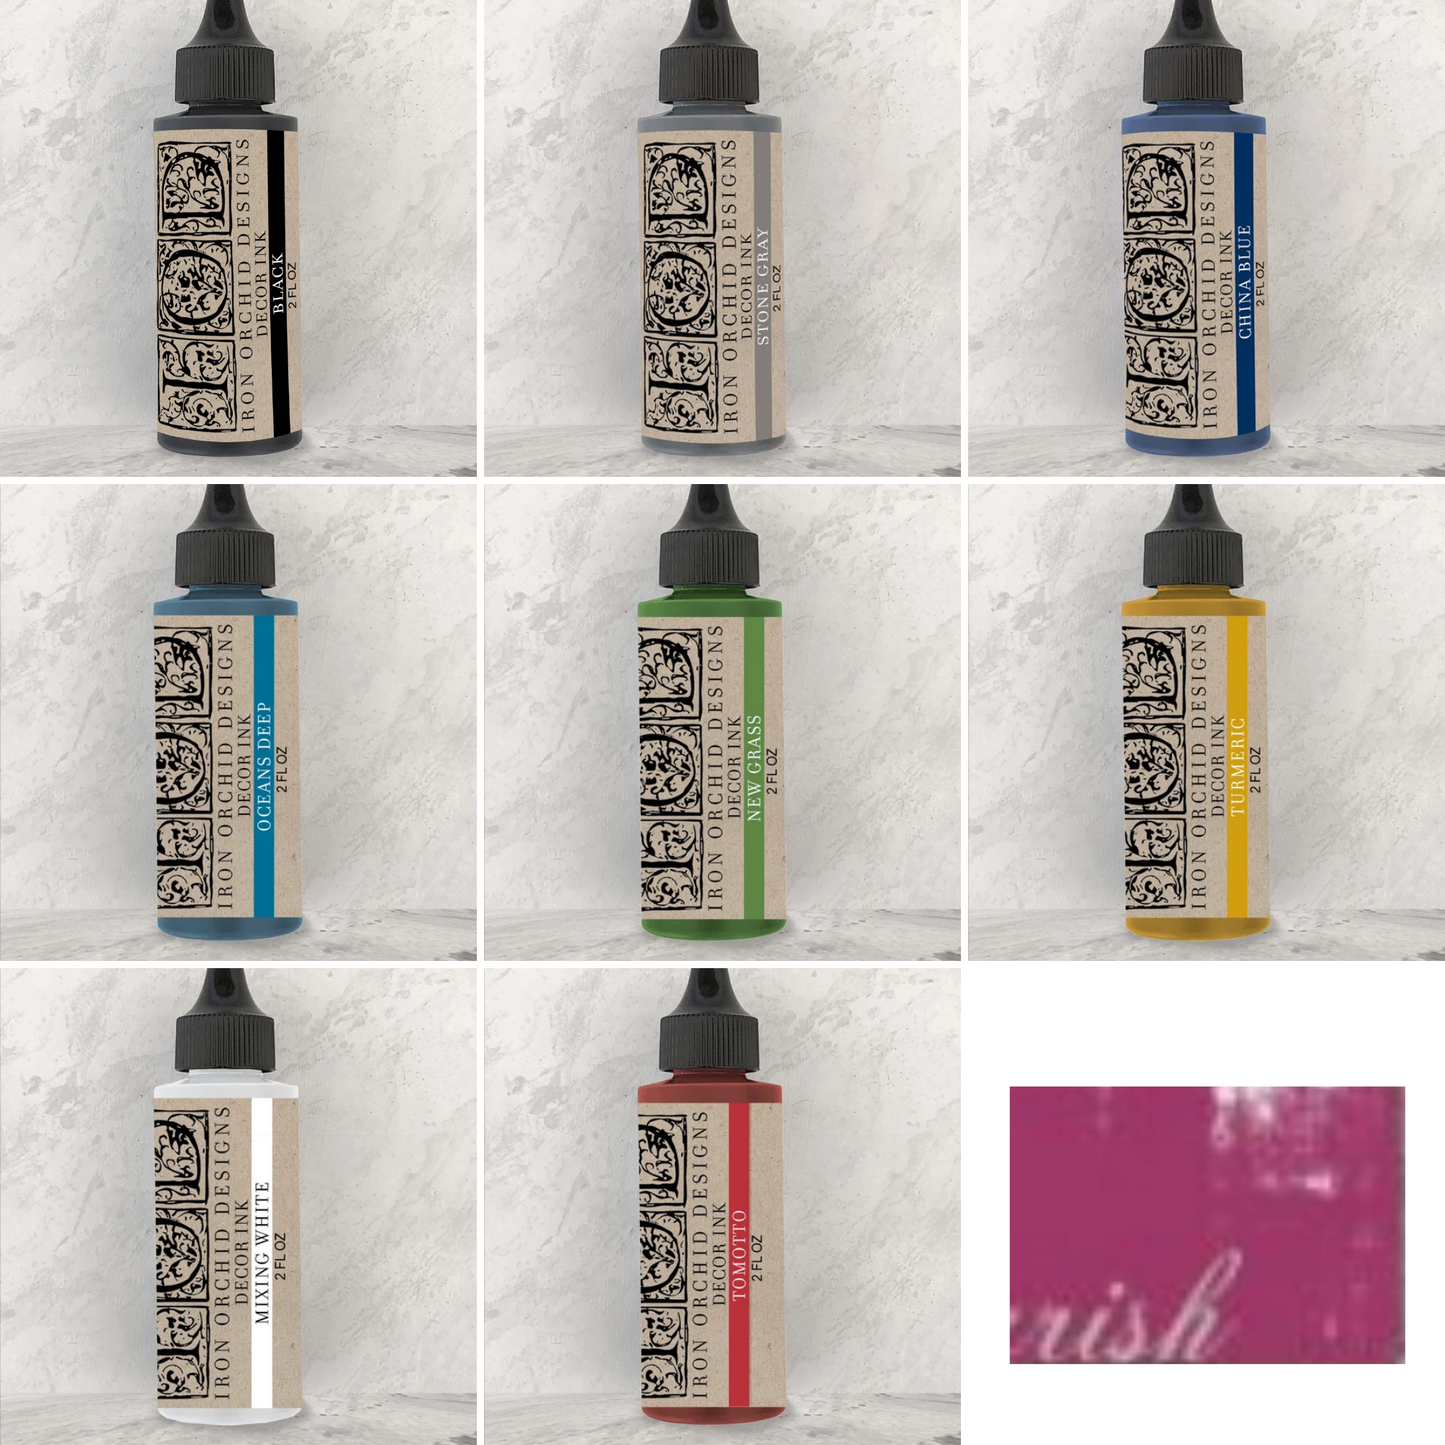 Collage photo of IOD Decor Ink 2 oz. bottles in colors Black, Stone Gray (charcoal), China Blue (navy blue), Oceans Deep (turquoise, New Grass (Green), Turmeric (yellow), Mixing White, Tomotto (red), Garish (magenta) at Milton's Daughter